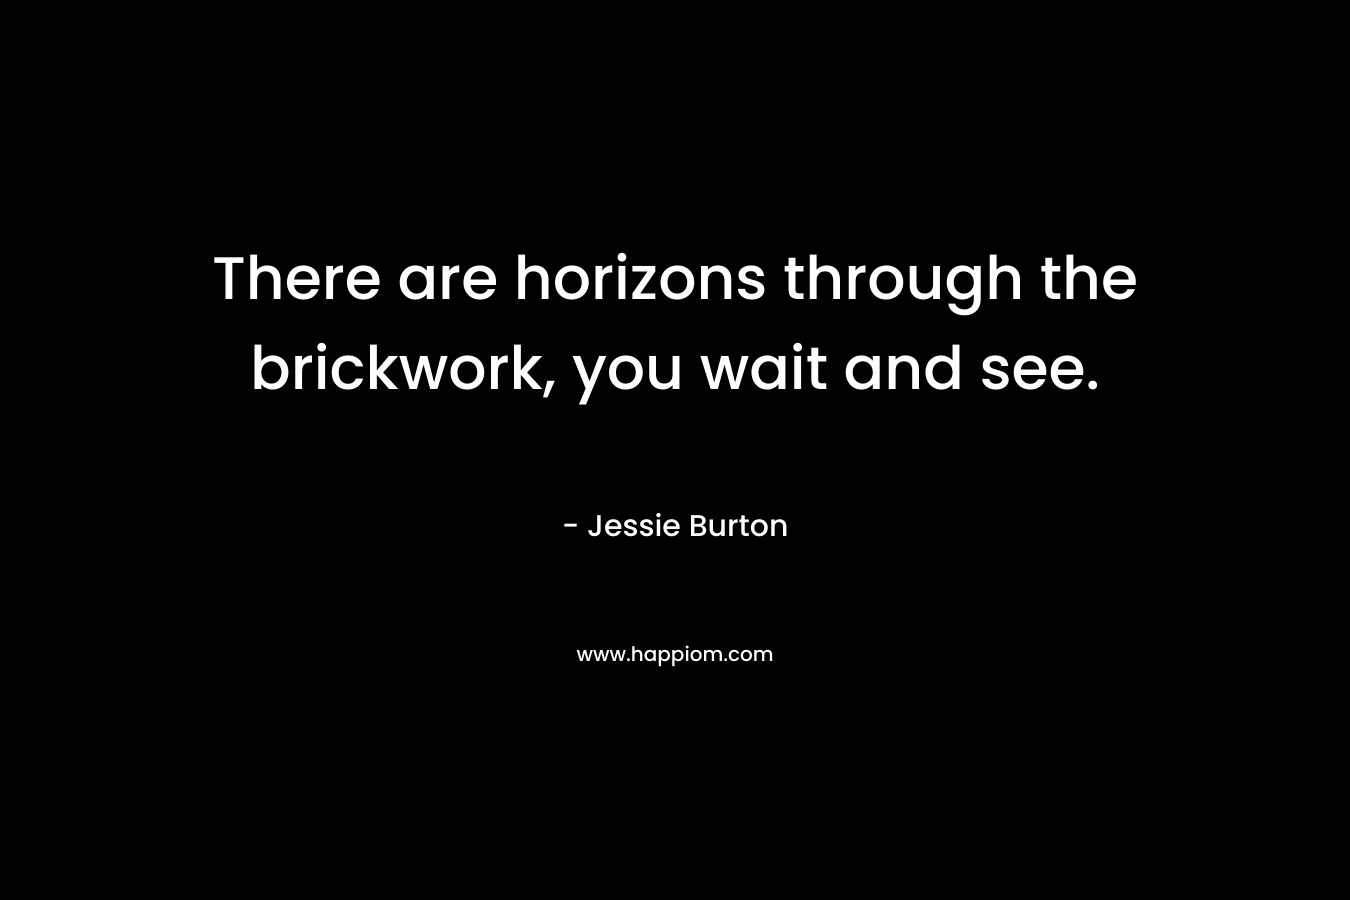 There are horizons through the brickwork, you wait and see. – Jessie Burton